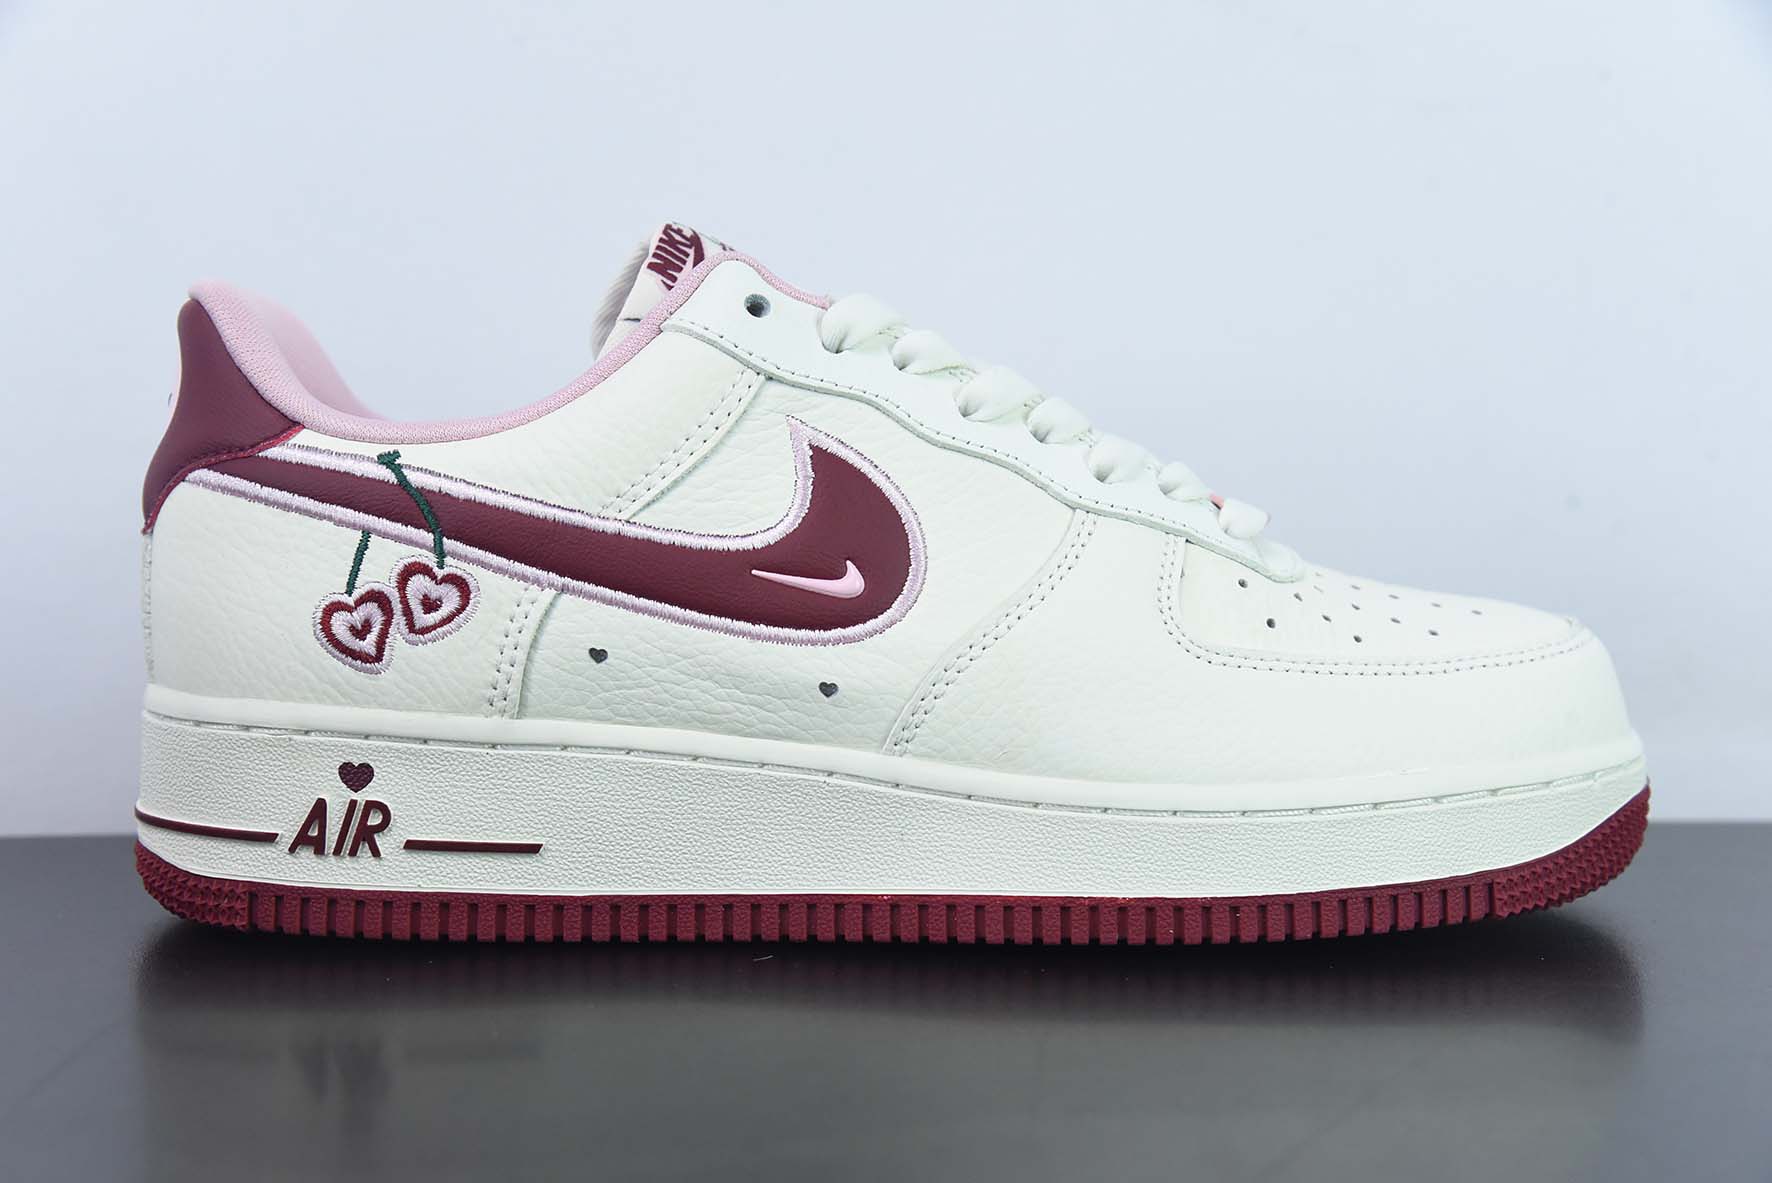 NIKE AIR FORCE 1 LOW – “VALENTINE’S DAY”